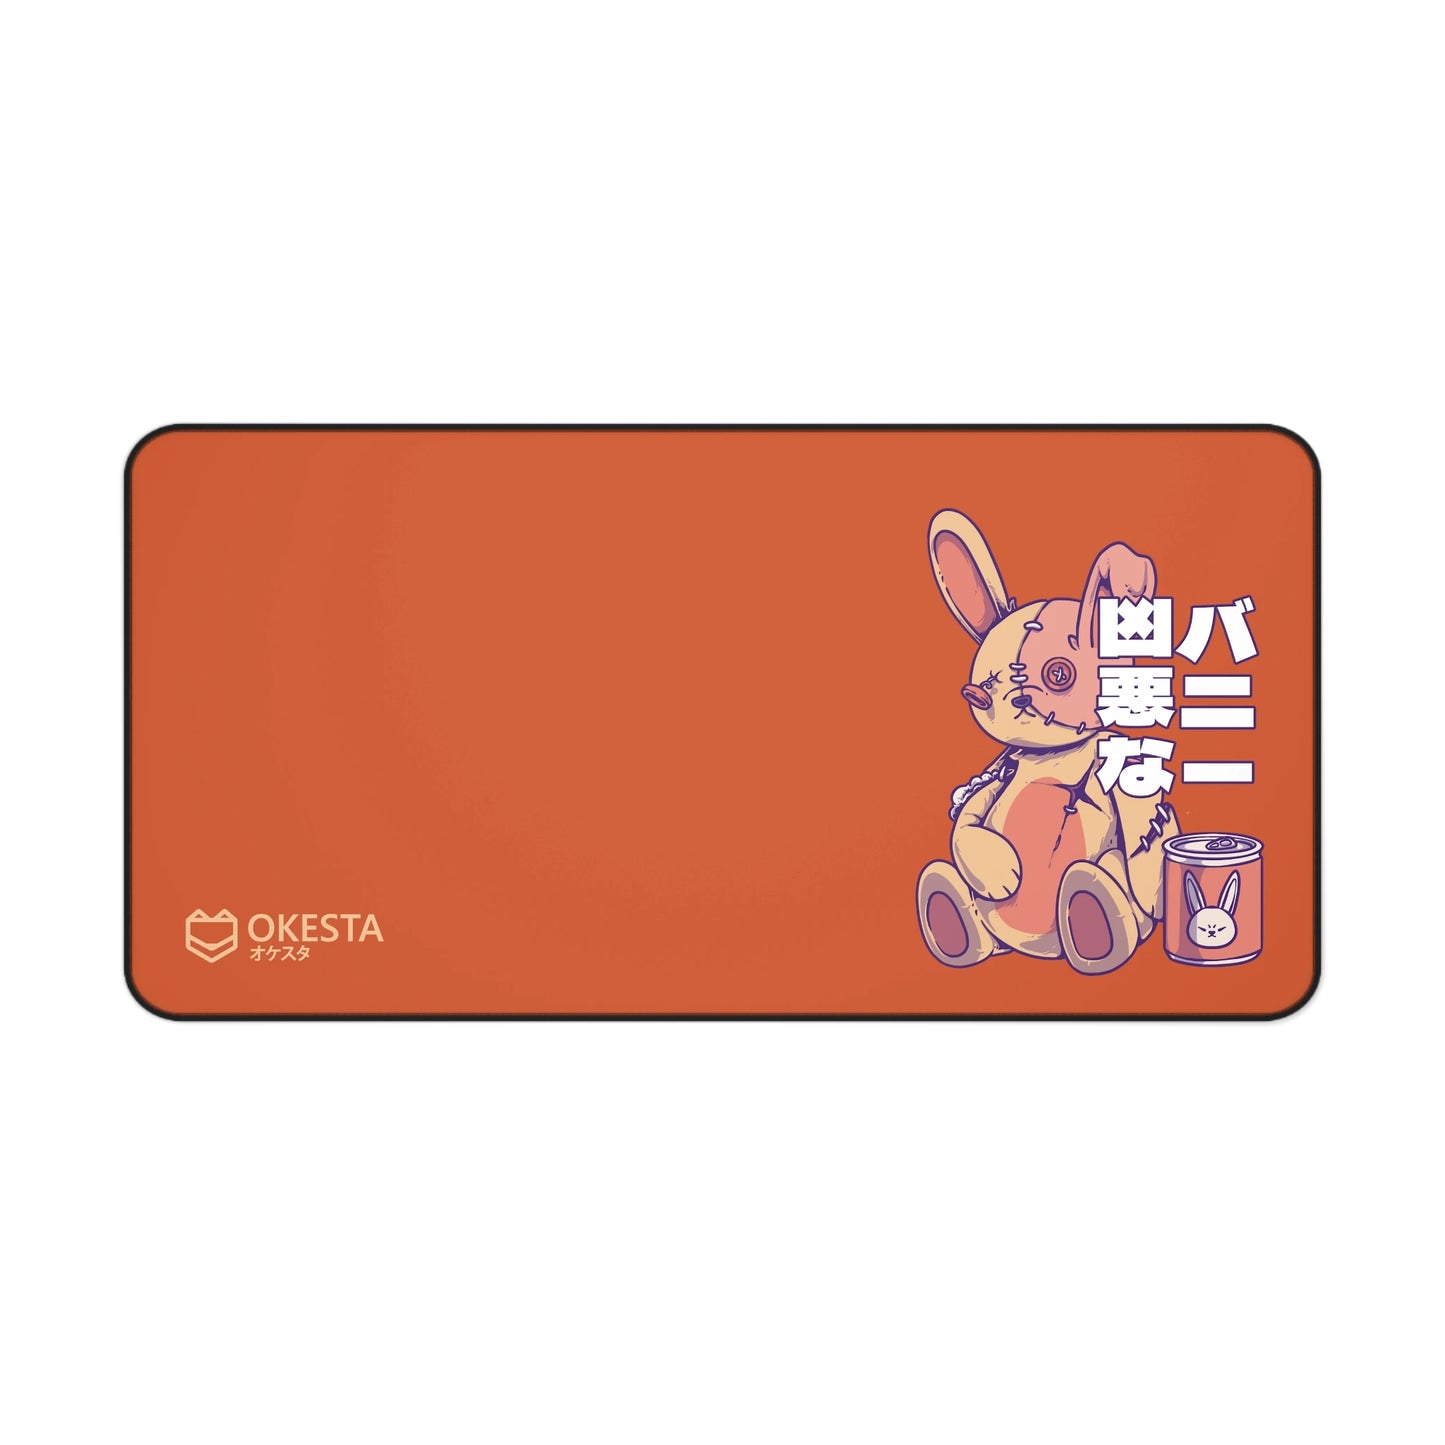 Dust Bunny Mouse Pad